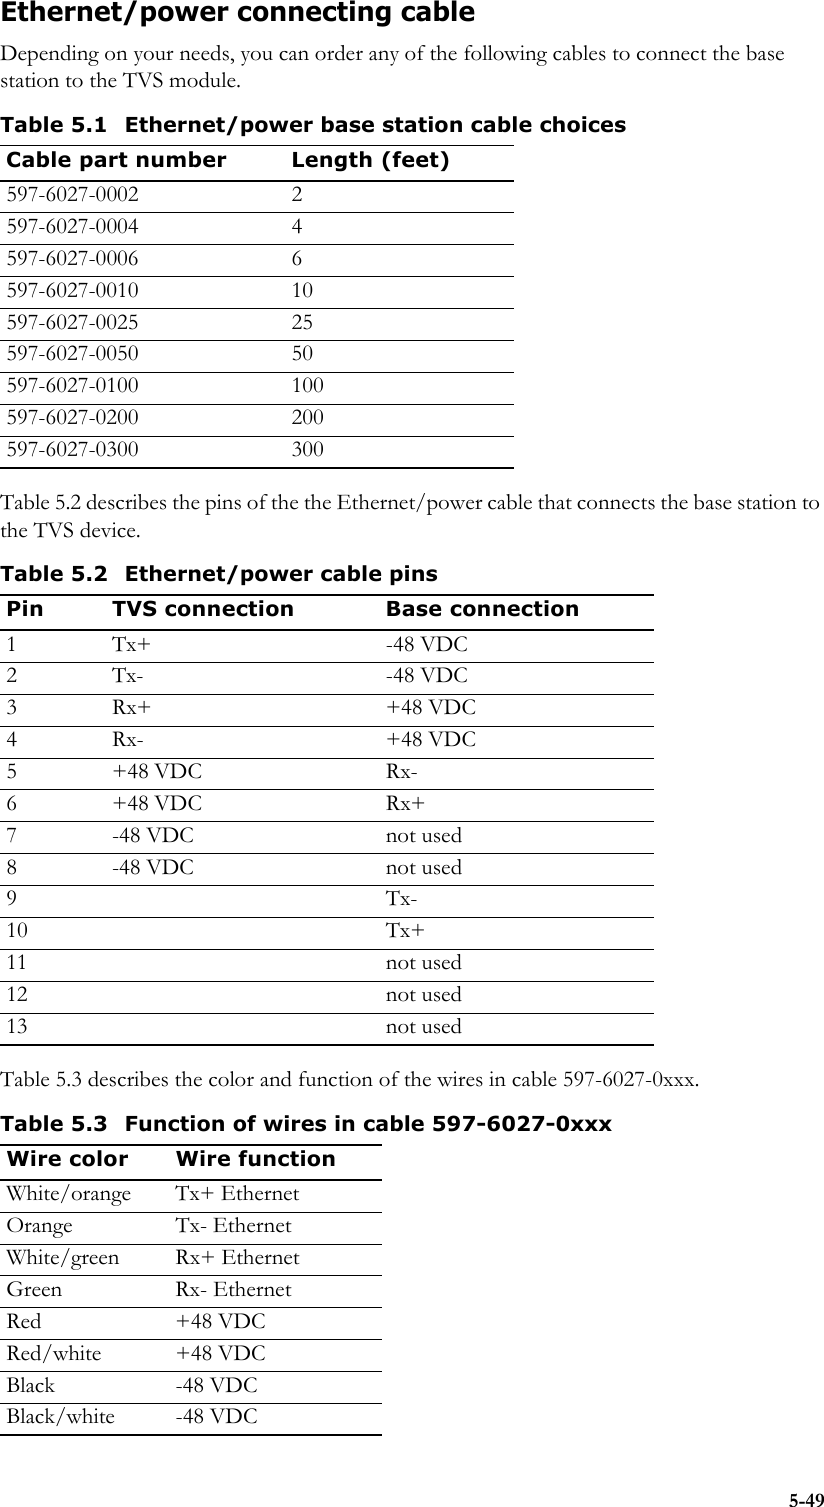 5-49Ethernet/power connecting cableDepending on your needs, you can order any of the following cables to connect the base station to the TVS module.Table 5.2 describes the pins of the the Ethernet/power cable that connects the base station to the TVS device.Table 5.3 describes the color and function of the wires in cable 597-6027-0xxx.Table 5.1 Ethernet/power base station cable choicesCable part number Length (feet)597-6027-0002 2597-6027-0004 4597-6027-0006 6597-6027-0010 10597-6027-0025 25597-6027-0050 50597-6027-0100 100597-6027-0200 200597-6027-0300 300Table 5.2 Ethernet/power cable pinsPin TVS connection Base connection1 Tx+ -48 VDC2 Tx- -48 VDC3 Rx+ +48 VDC4 Rx- +48 VDC5+48 VDC Rx-6+48 VDC Rx+7 -48 VDC not used8 -48 VDC not used9Tx-10 Tx+11 not used12 not used13 not usedTable 5.3 Function of wires in cable 597-6027-0xxxWire color Wire functionWhite/orange Tx+ EthernetOrange Tx- EthernetWhite/green Rx+ EthernetGreen Rx- EthernetRed +48 VDCRed/white +48 VDCBlack -48 VDCBlack/white -48 VDC